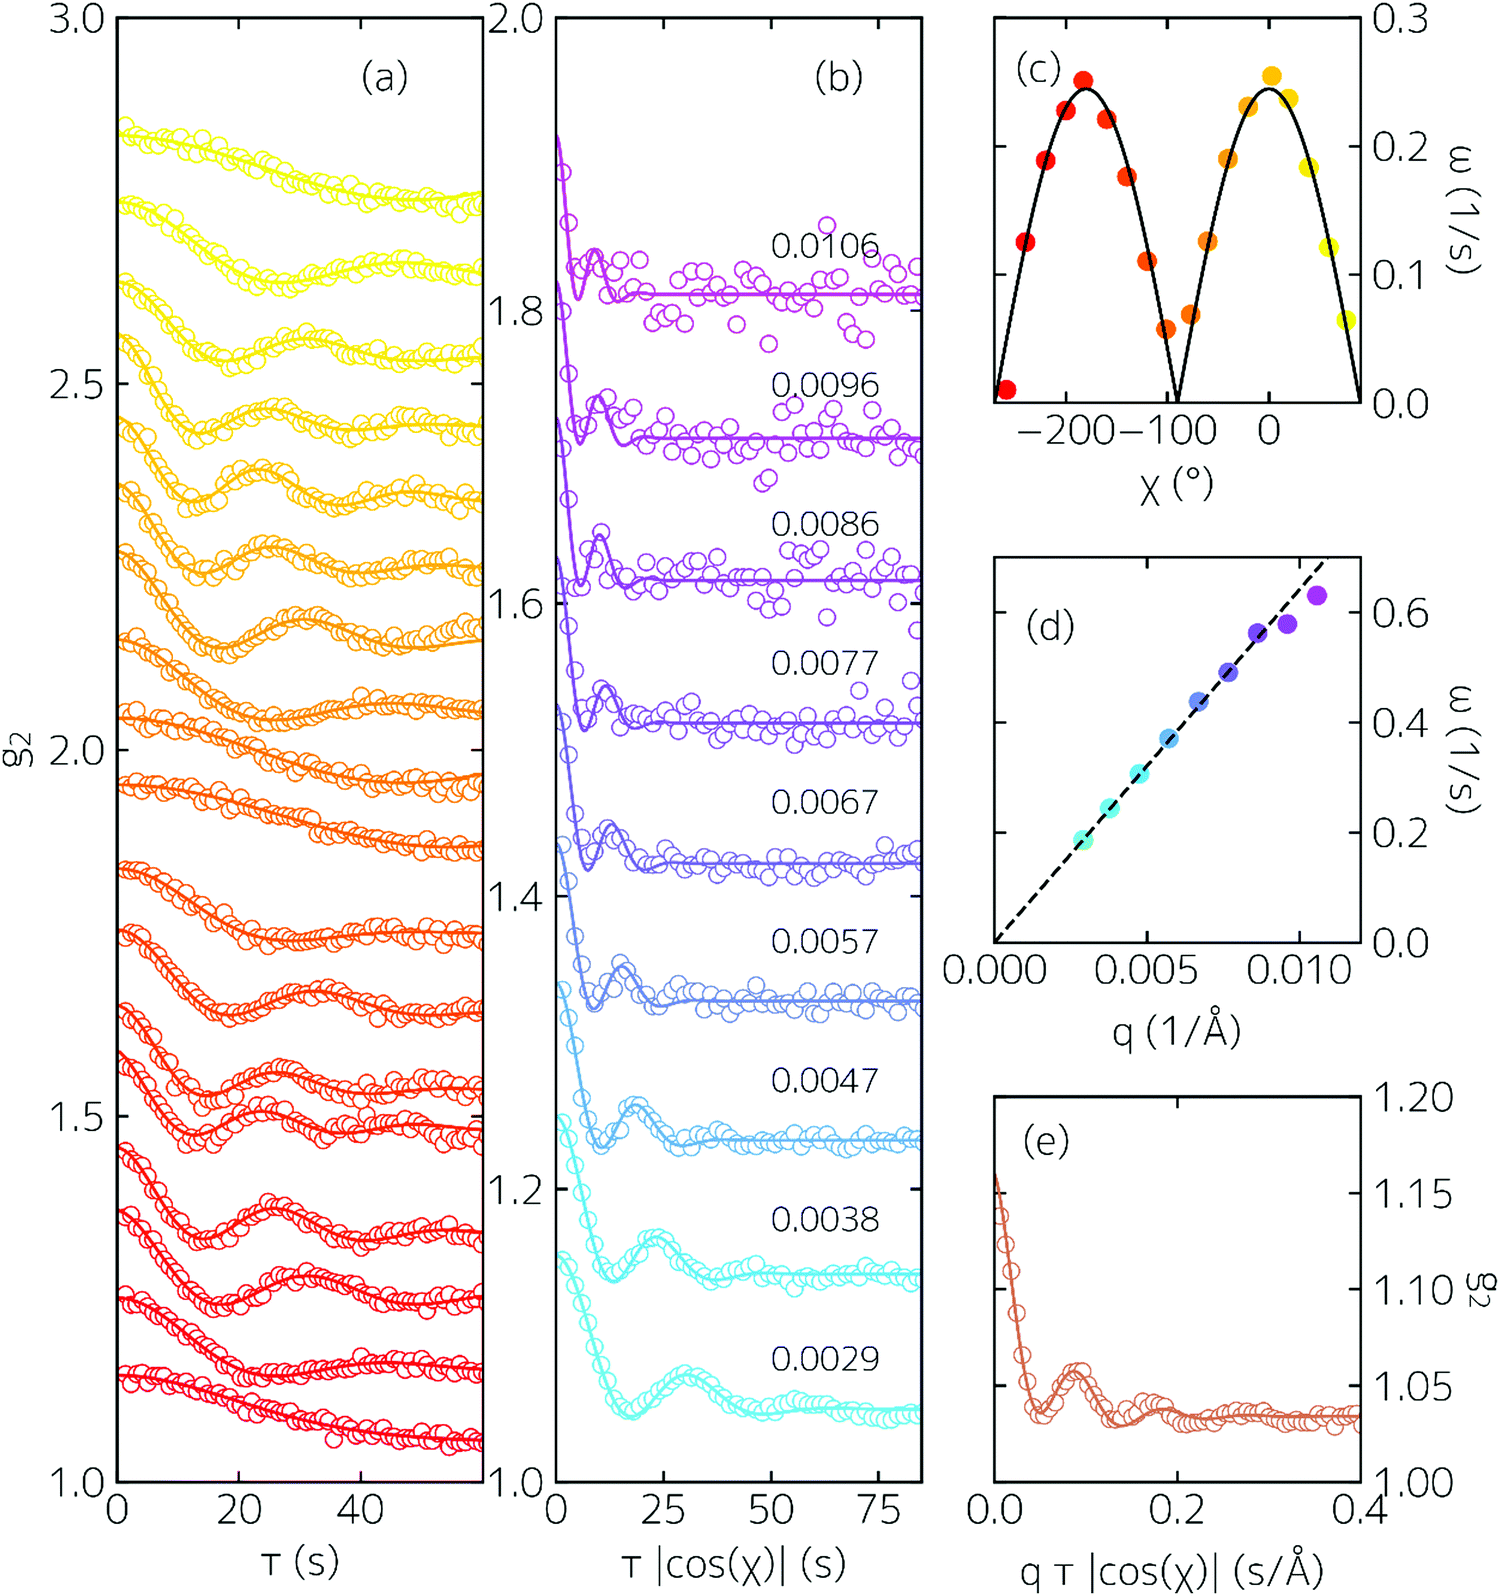 Concentration And Velocity Profiles In A Polymeric Lithium Ion Battery Electrolyte Energy Environmental Science Rsc Publishing